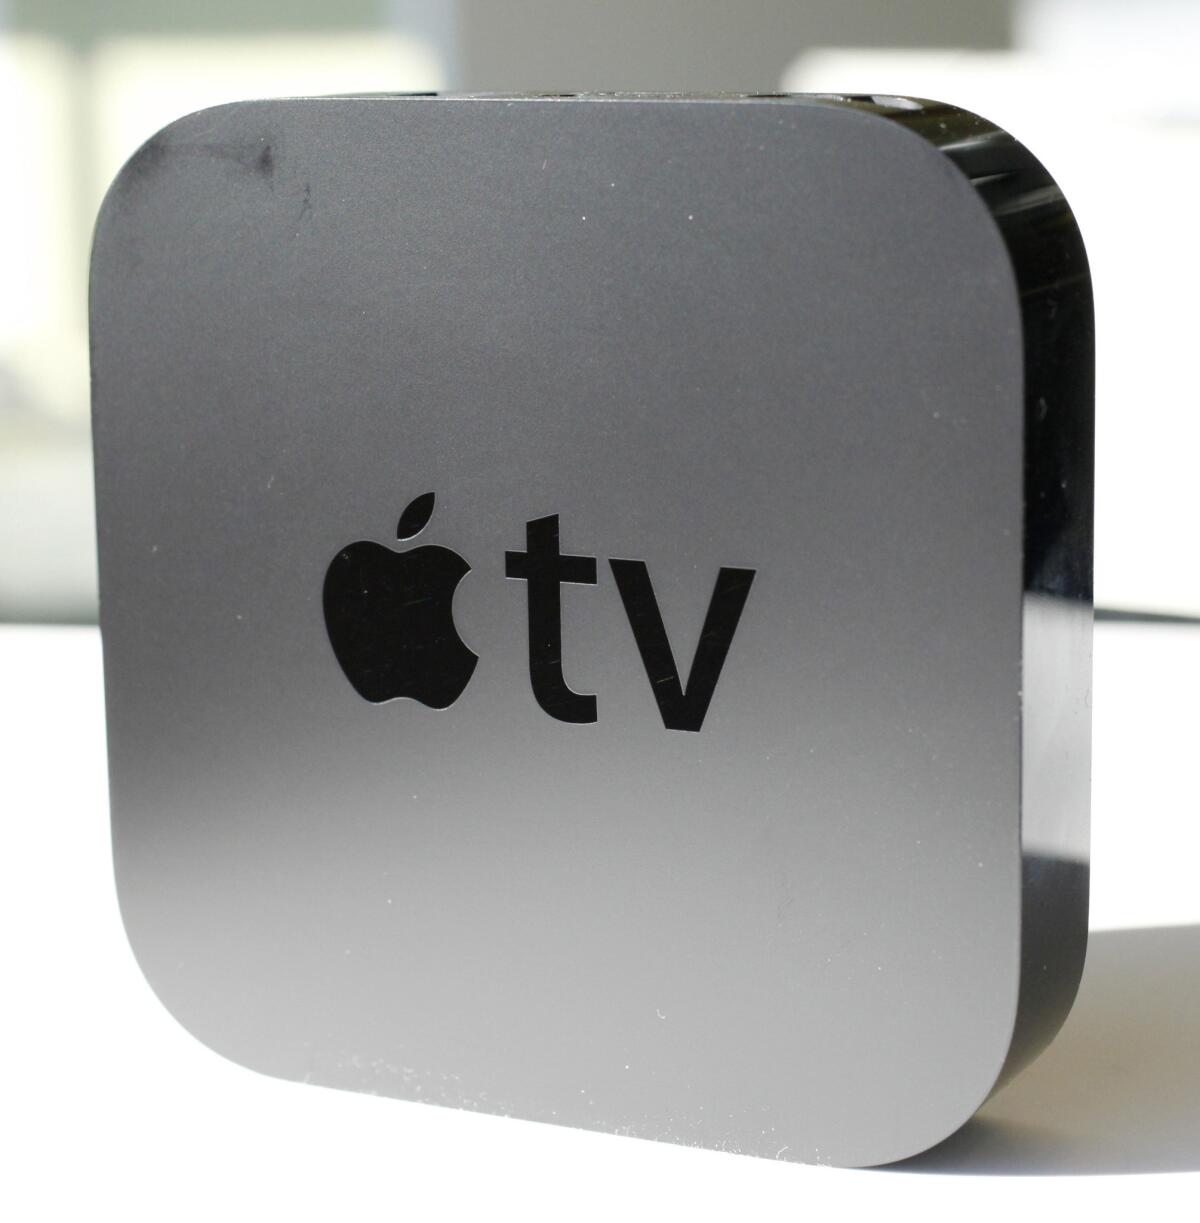 A report Wednesday said new code in Apple's software seems to indicate the tech company will bring Siri to the next version of Apple TV.